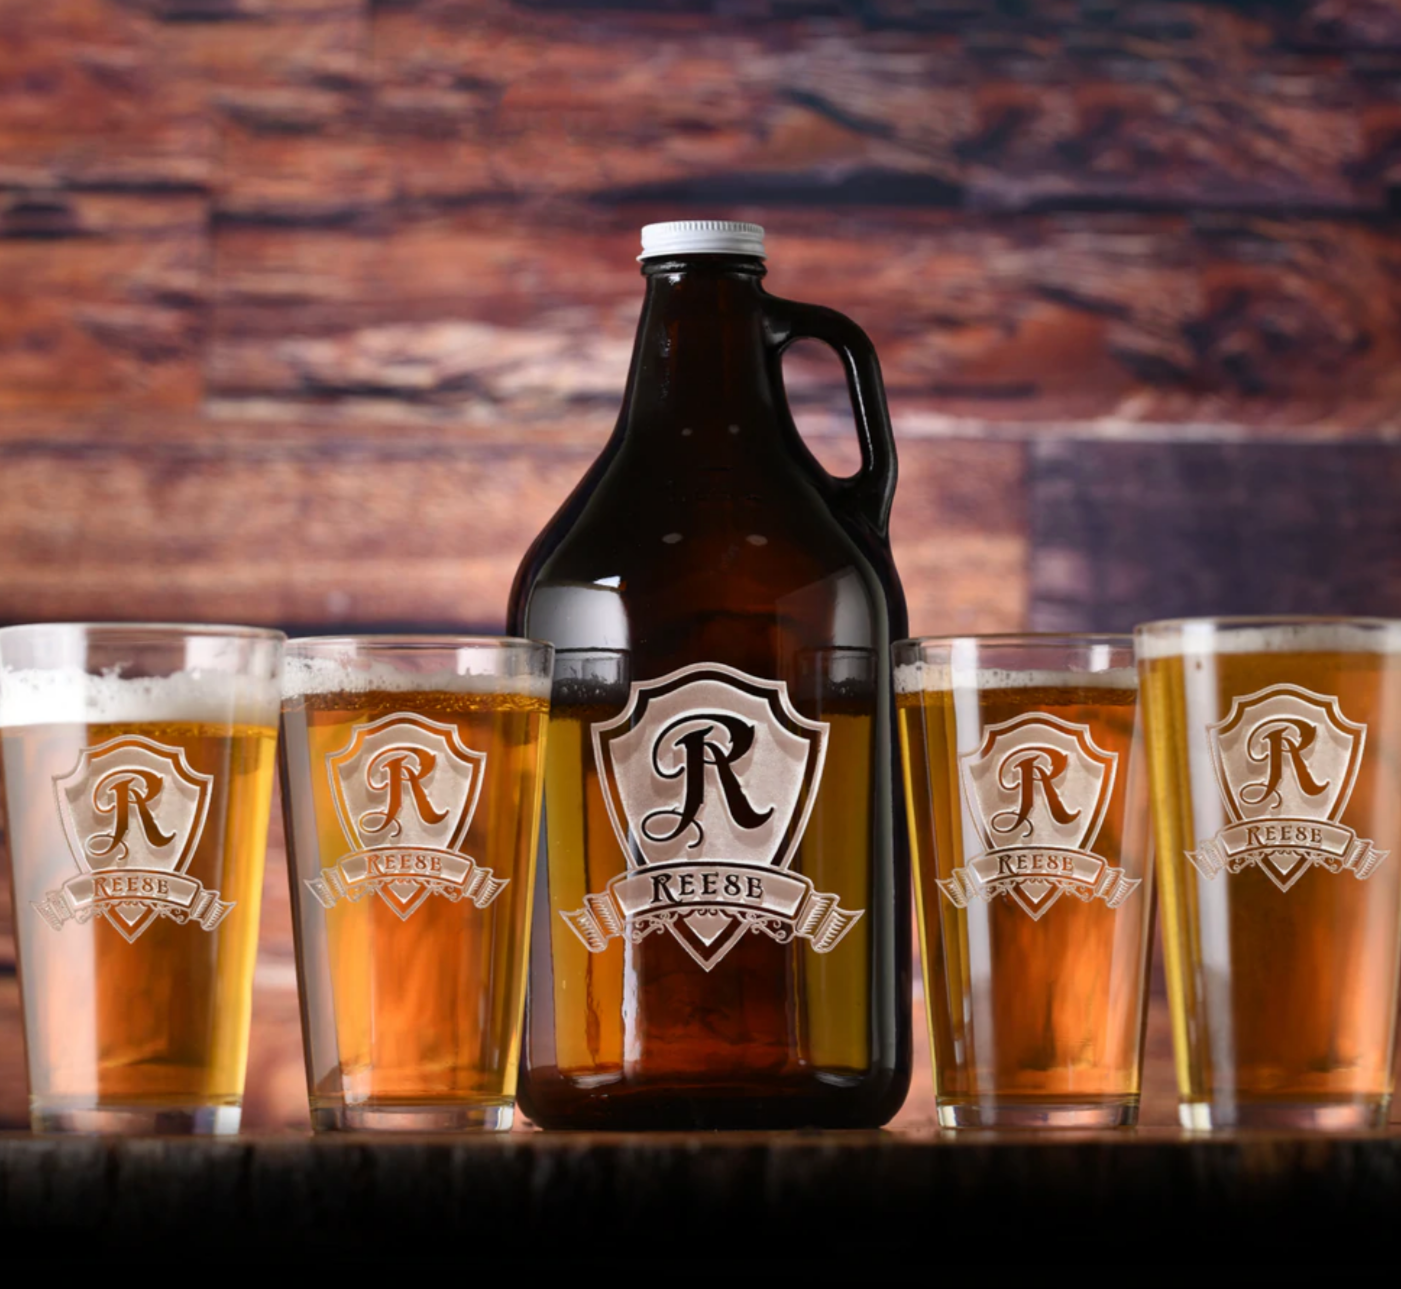 Engraved Custom Logo Pint Glasses | Crystal Imagery by Groovy Guy Gifts